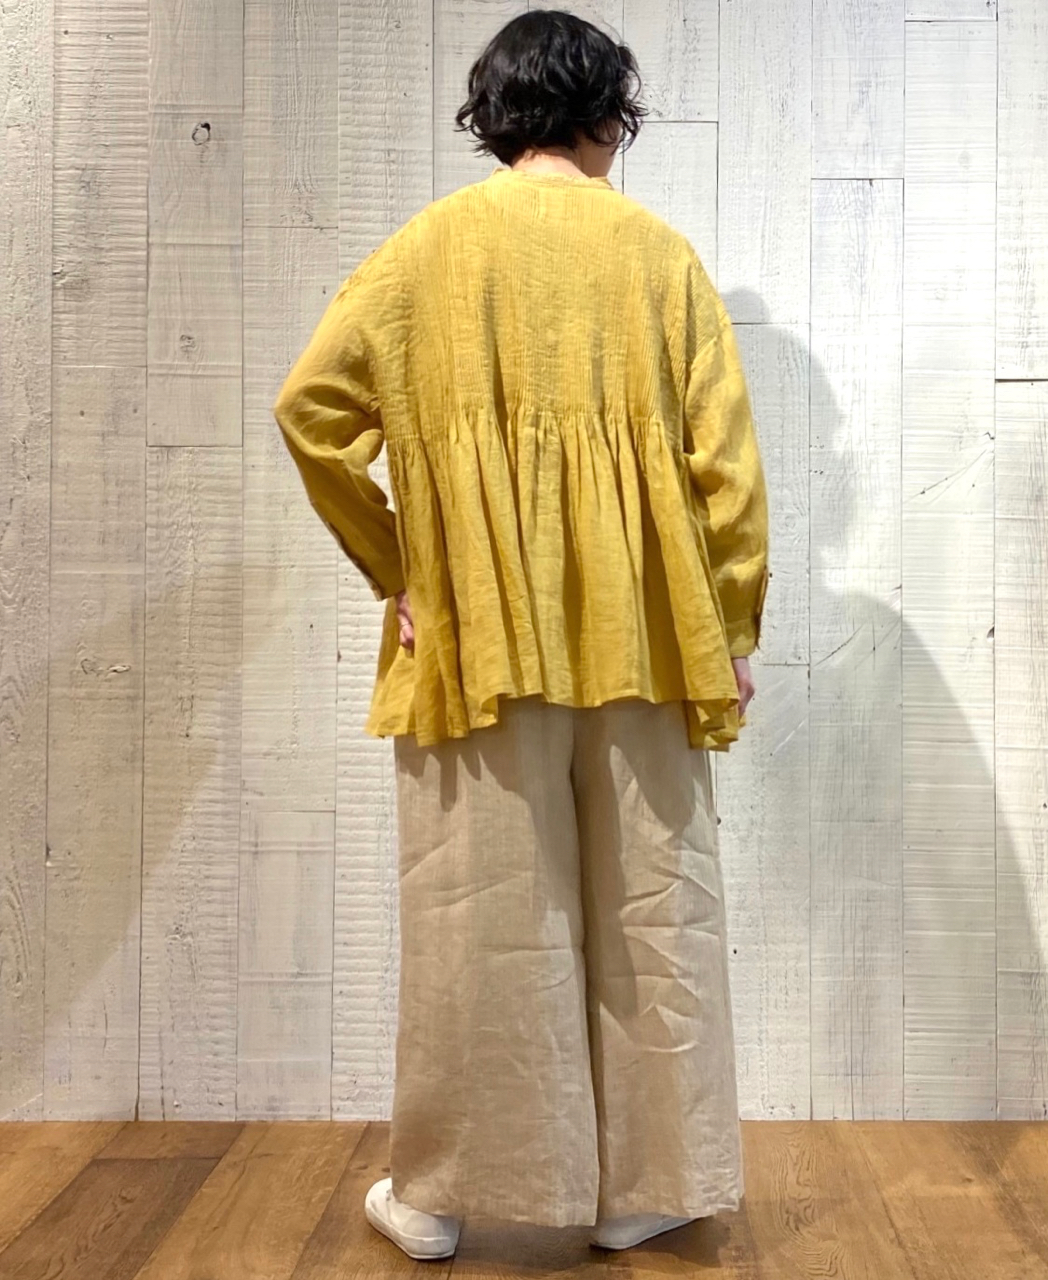 NMDS22121 (シャツ) 80'S POWER LOOM LINEN PLAIN LACE COLLAR SHIRT WITH MINI PINTUCK